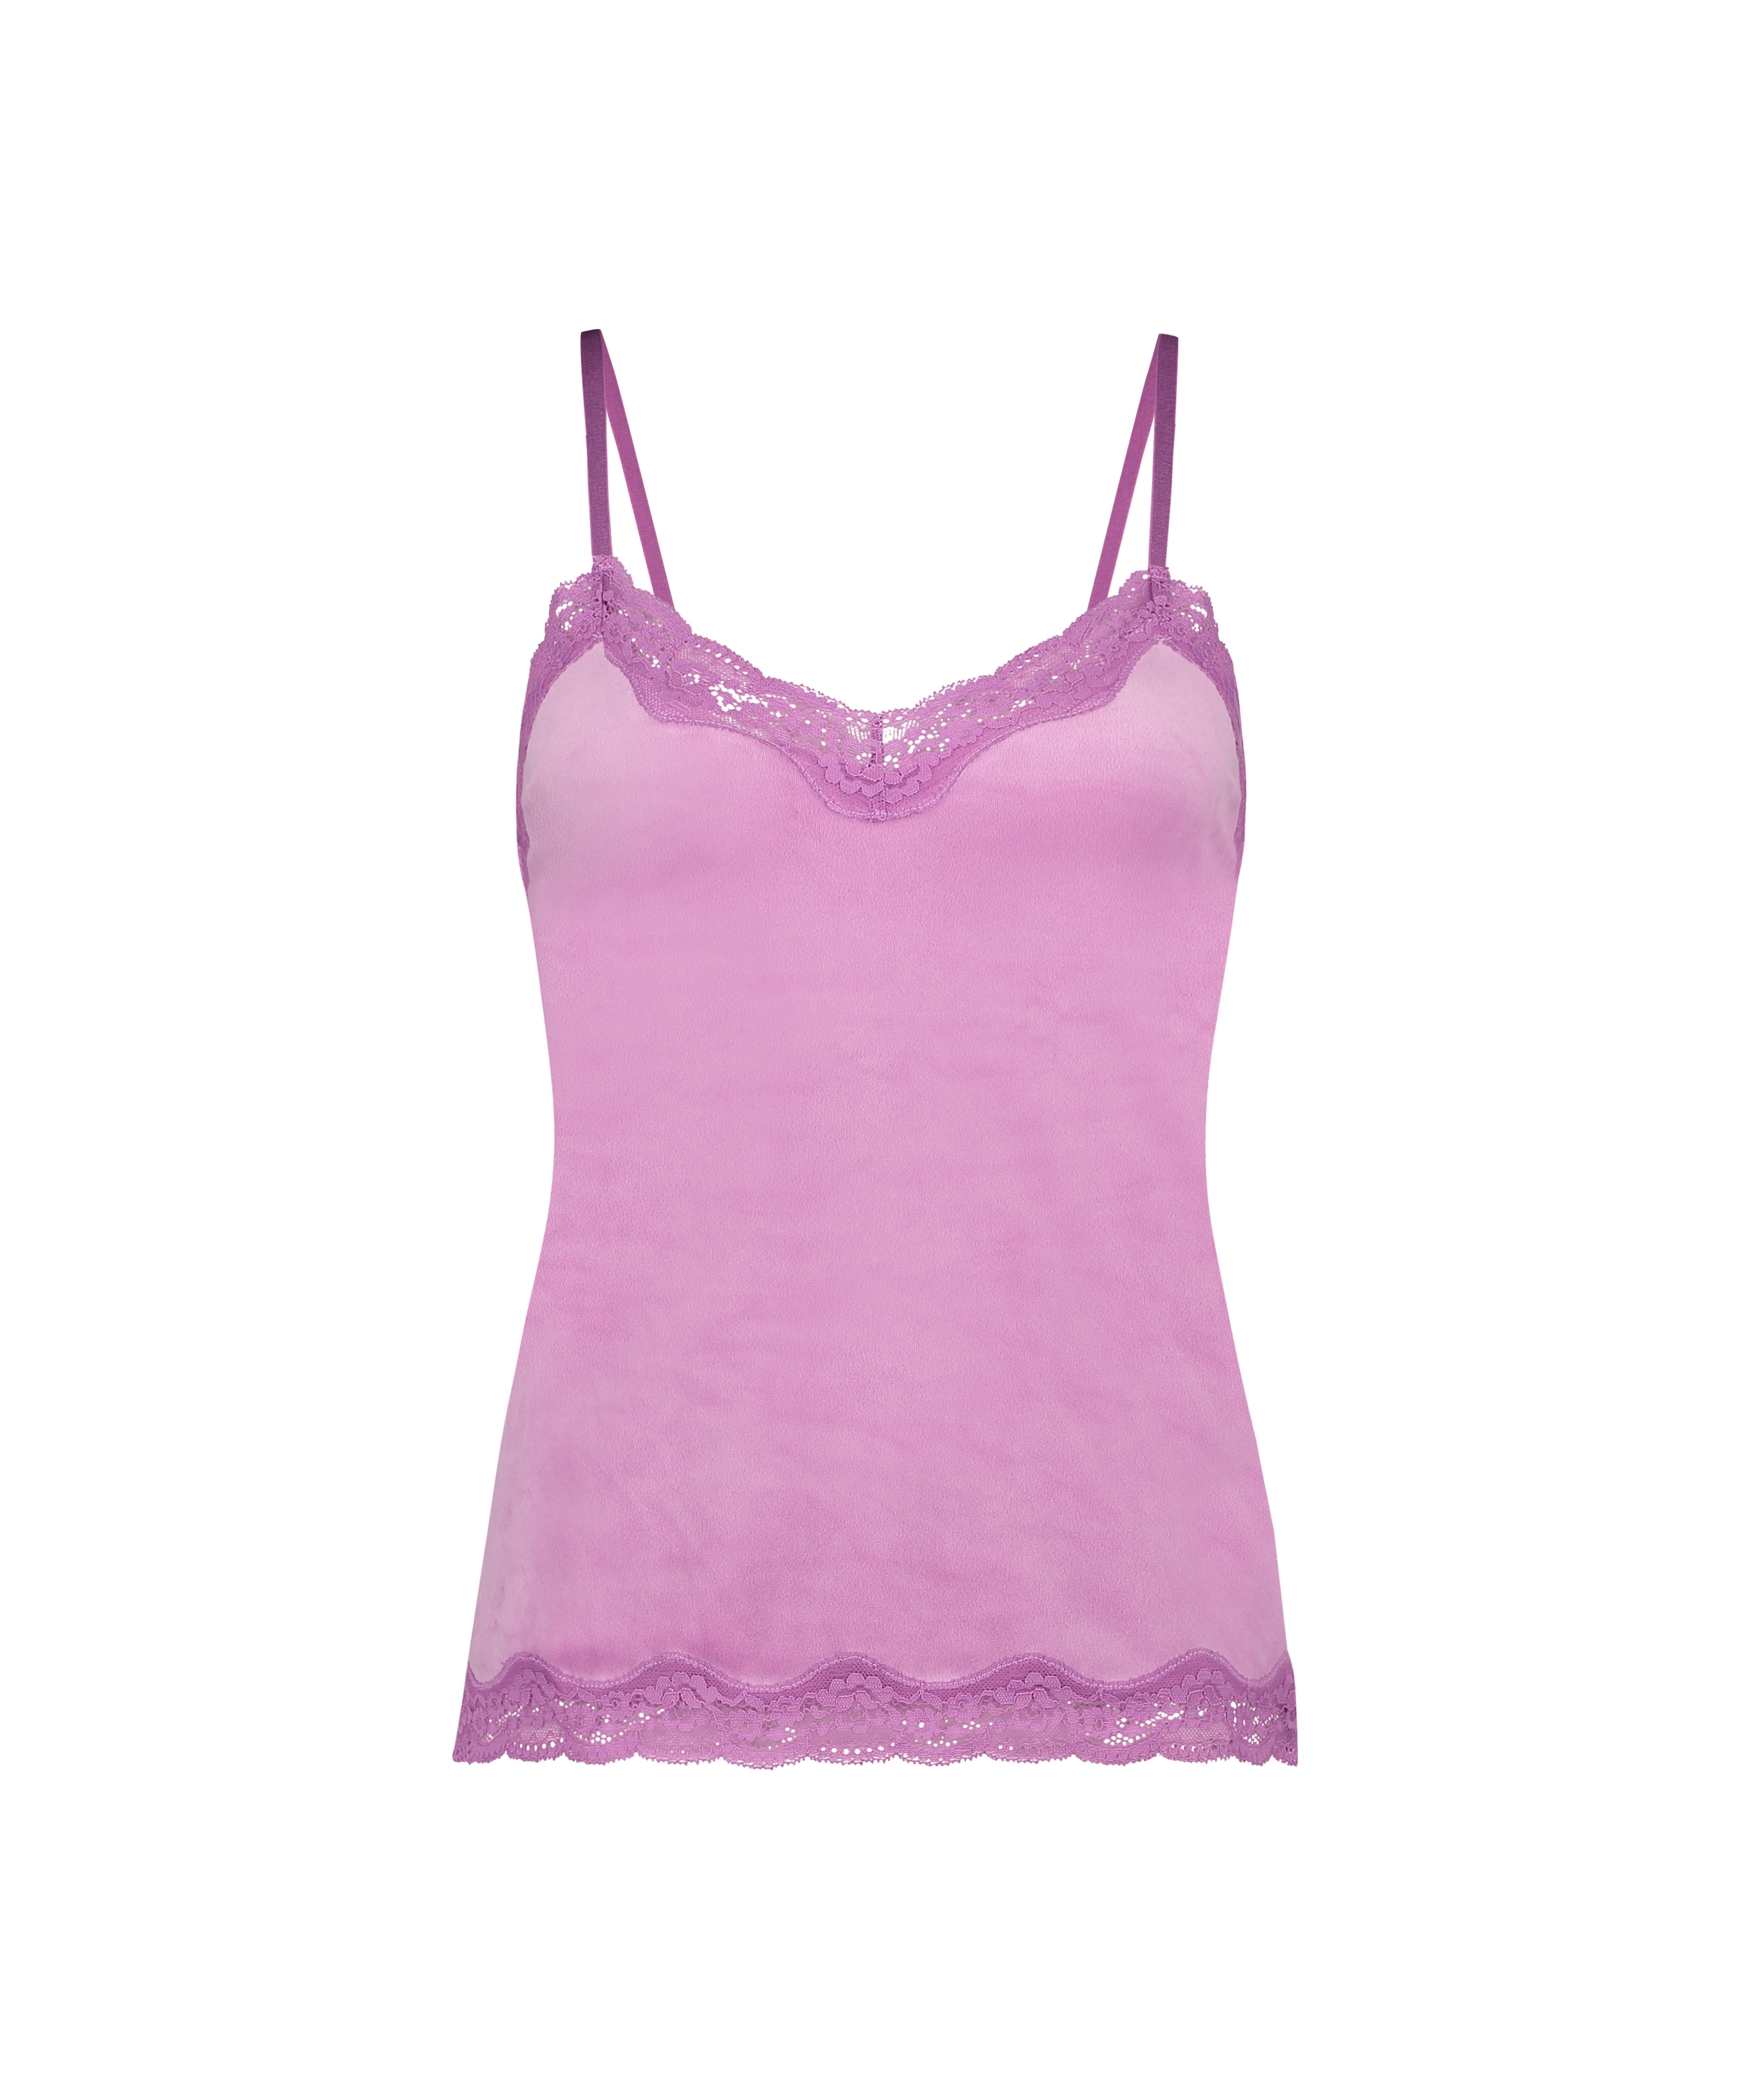 Velours Lace Cami Top for £22 - Tops - Hunkemöller